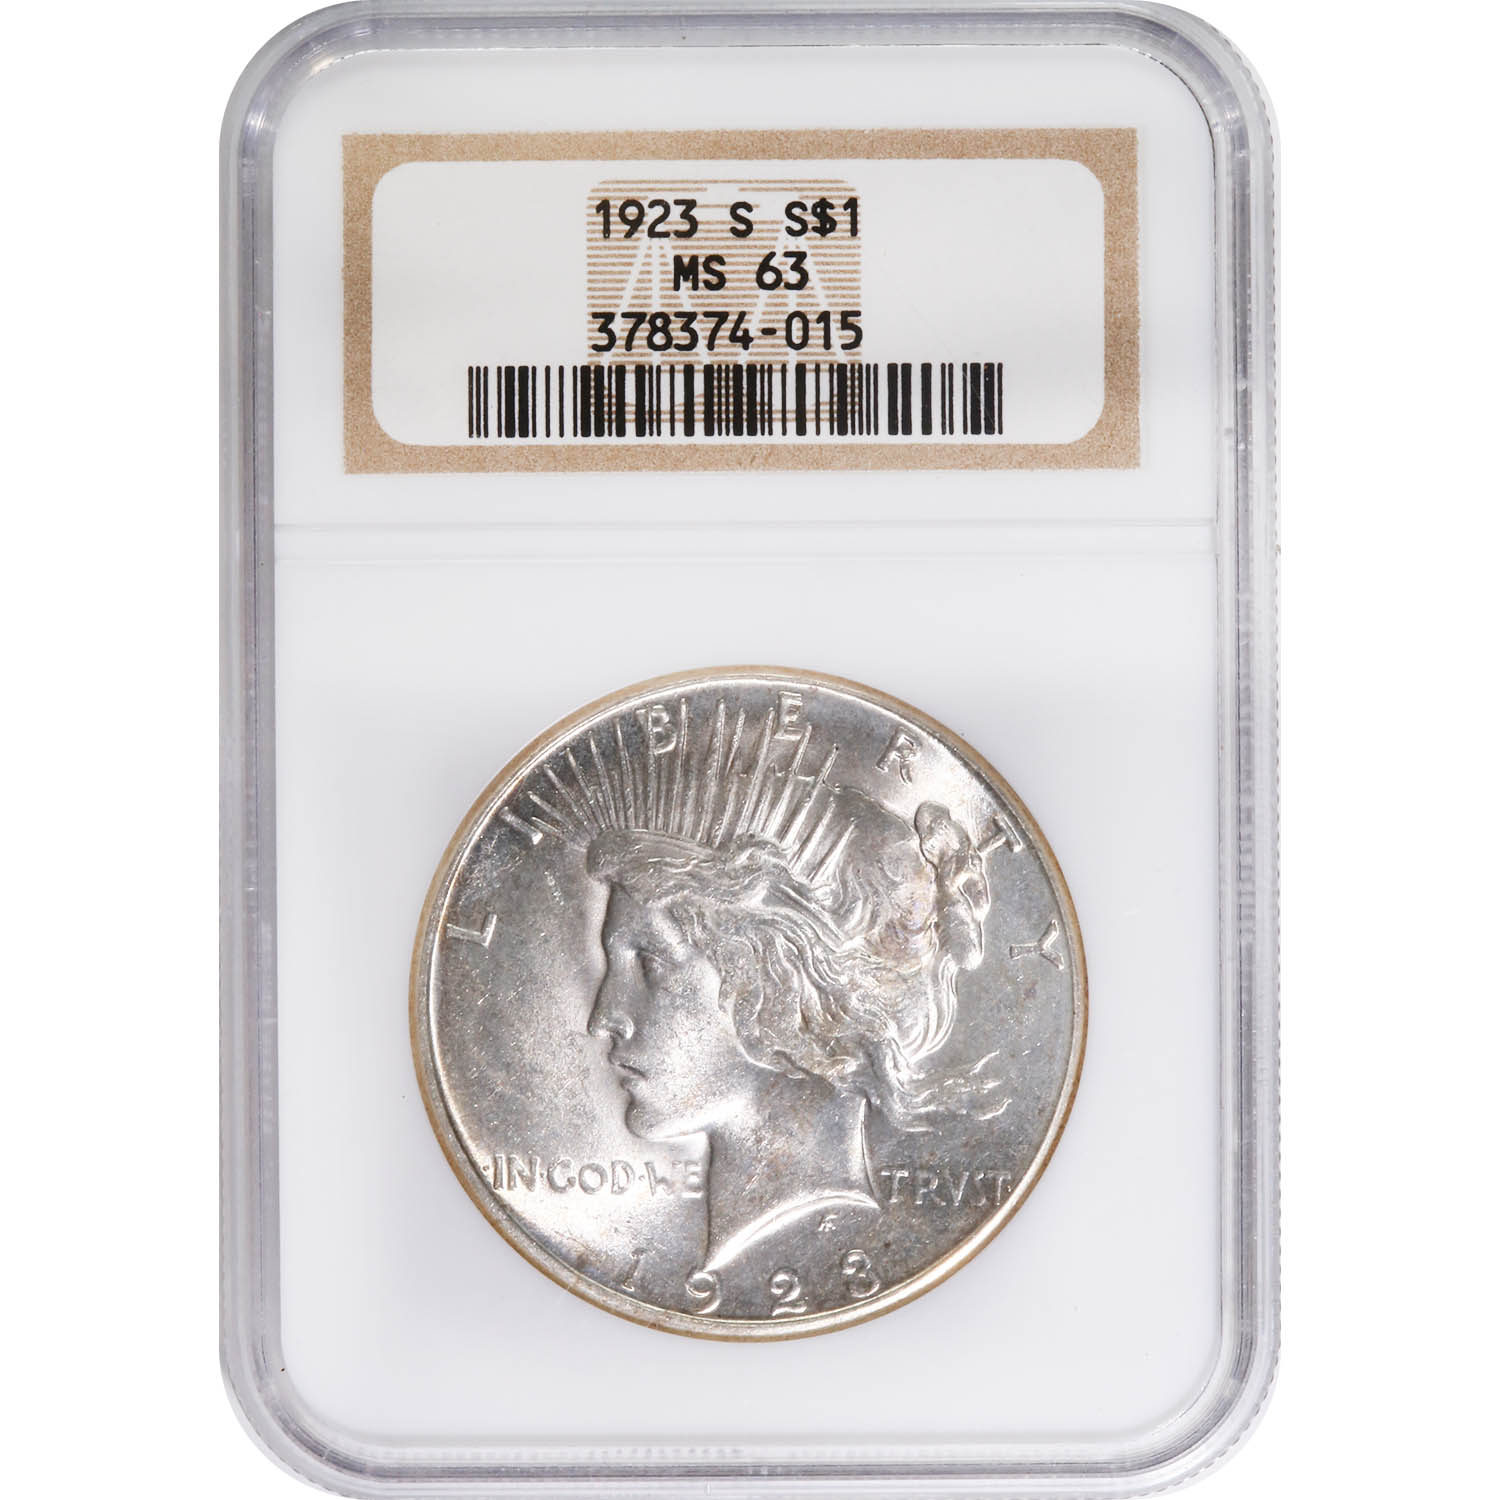 Certified Peace Silver Dollar 1923-S MS63 NGC